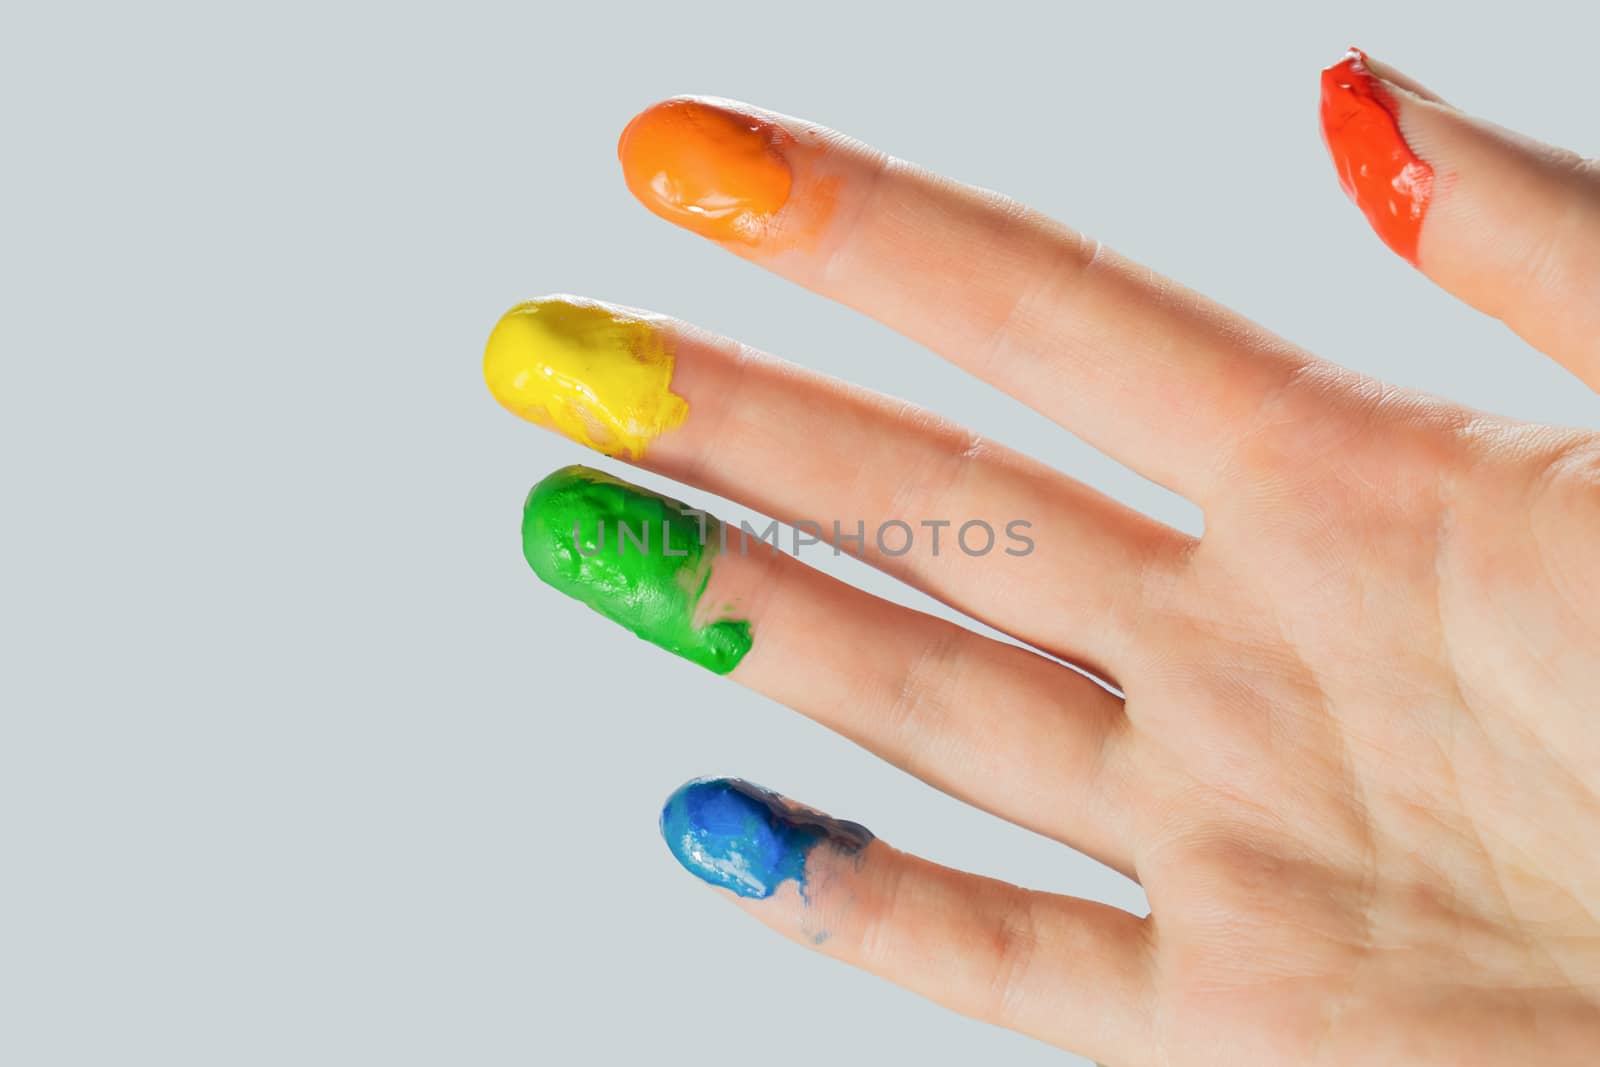 Close-up view of a hand with paint on the fingertips. Blue, green, yellow, orange and red paints on fingers, studio shot.